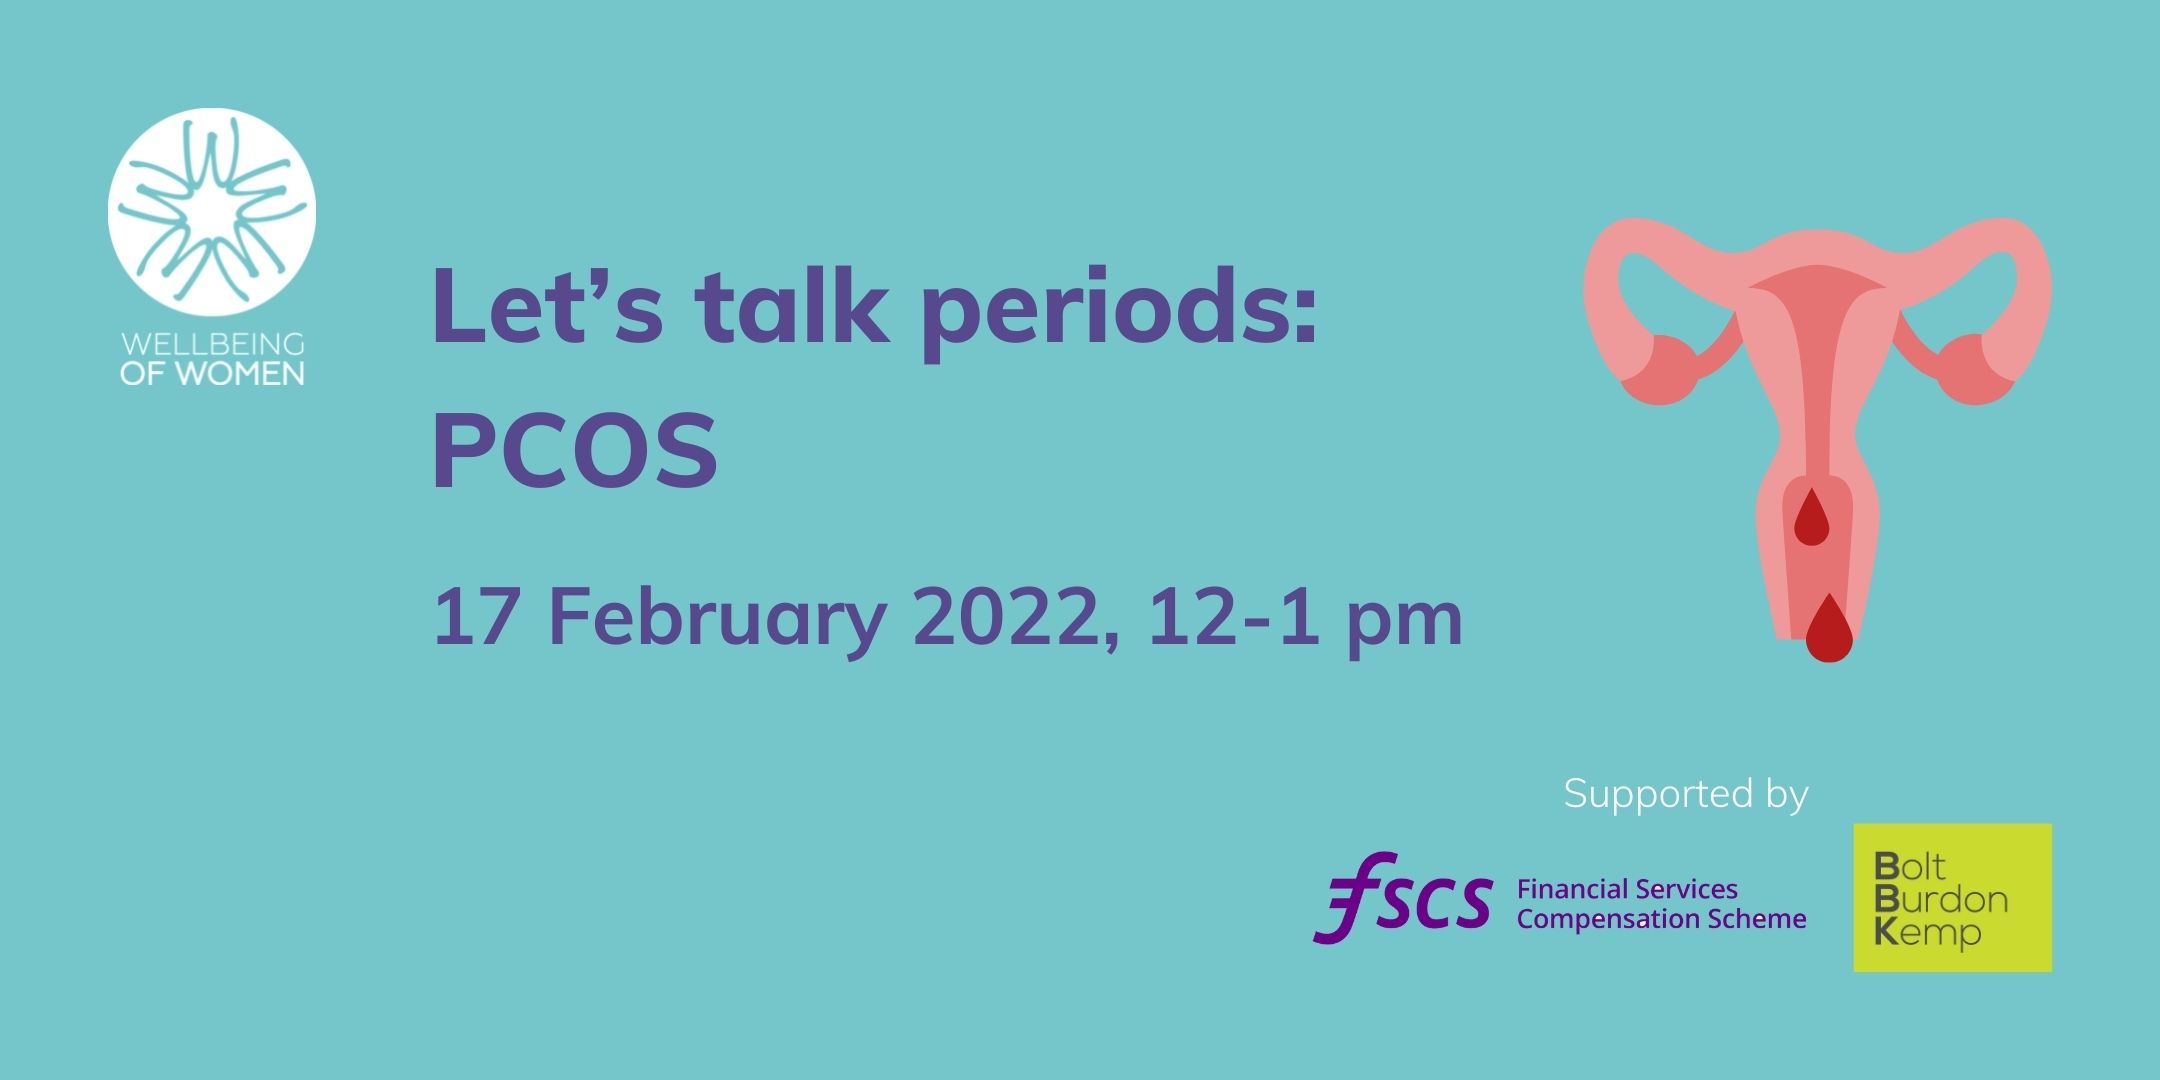 Let’s talk periods- Polycystic Ovarian Syndrome (PCOS)